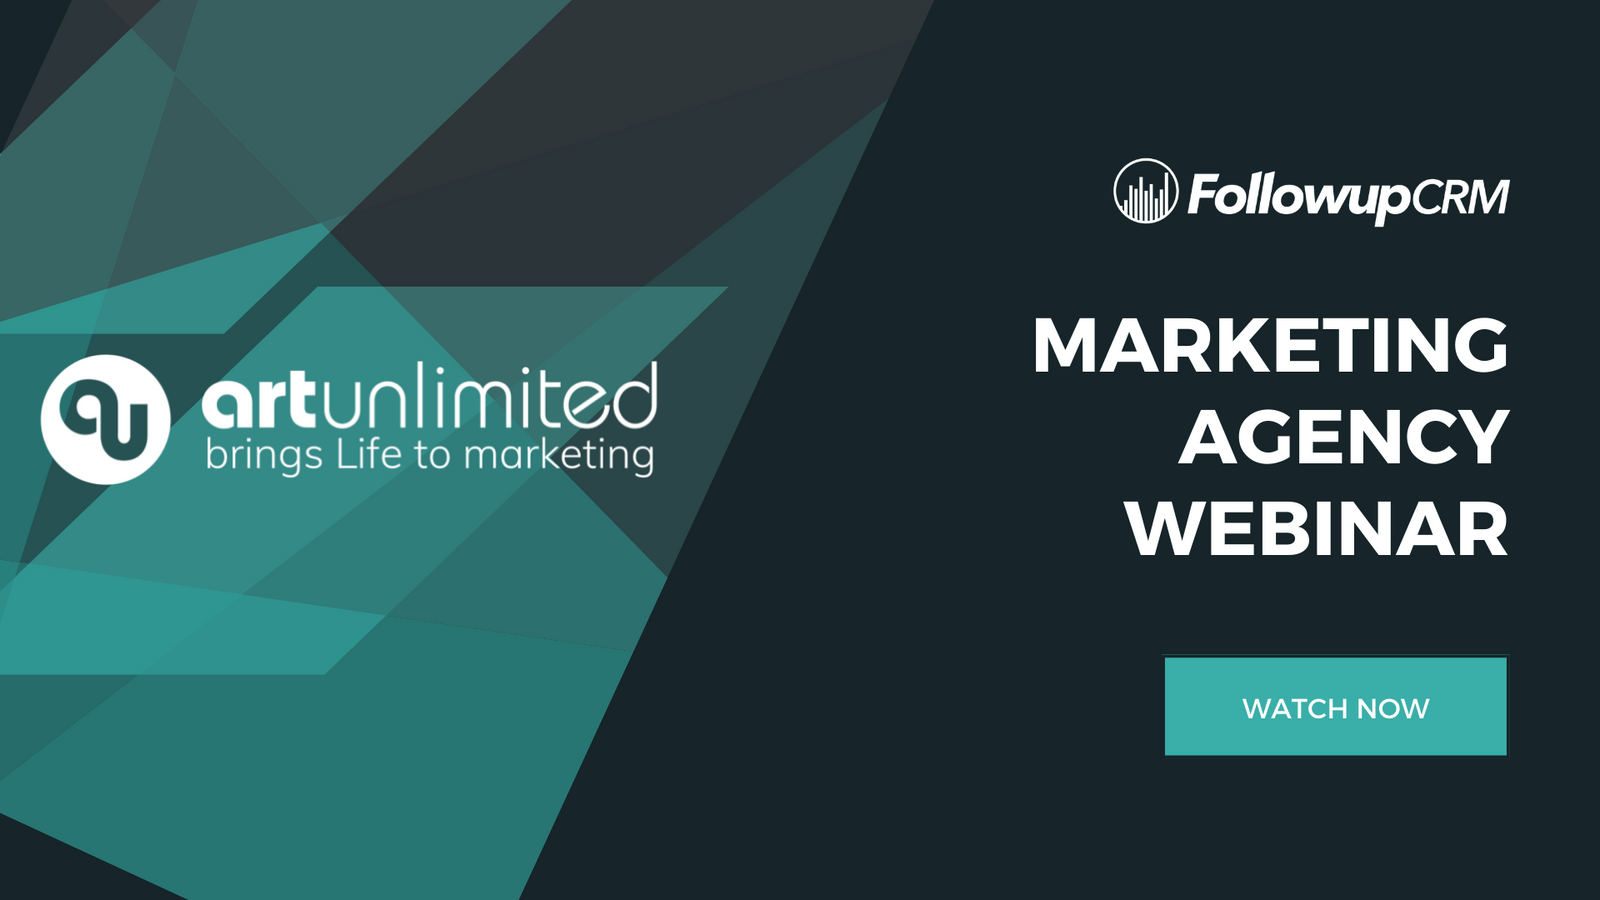 Followup CRM and ArtUnlimited Marketing Agency Webinar